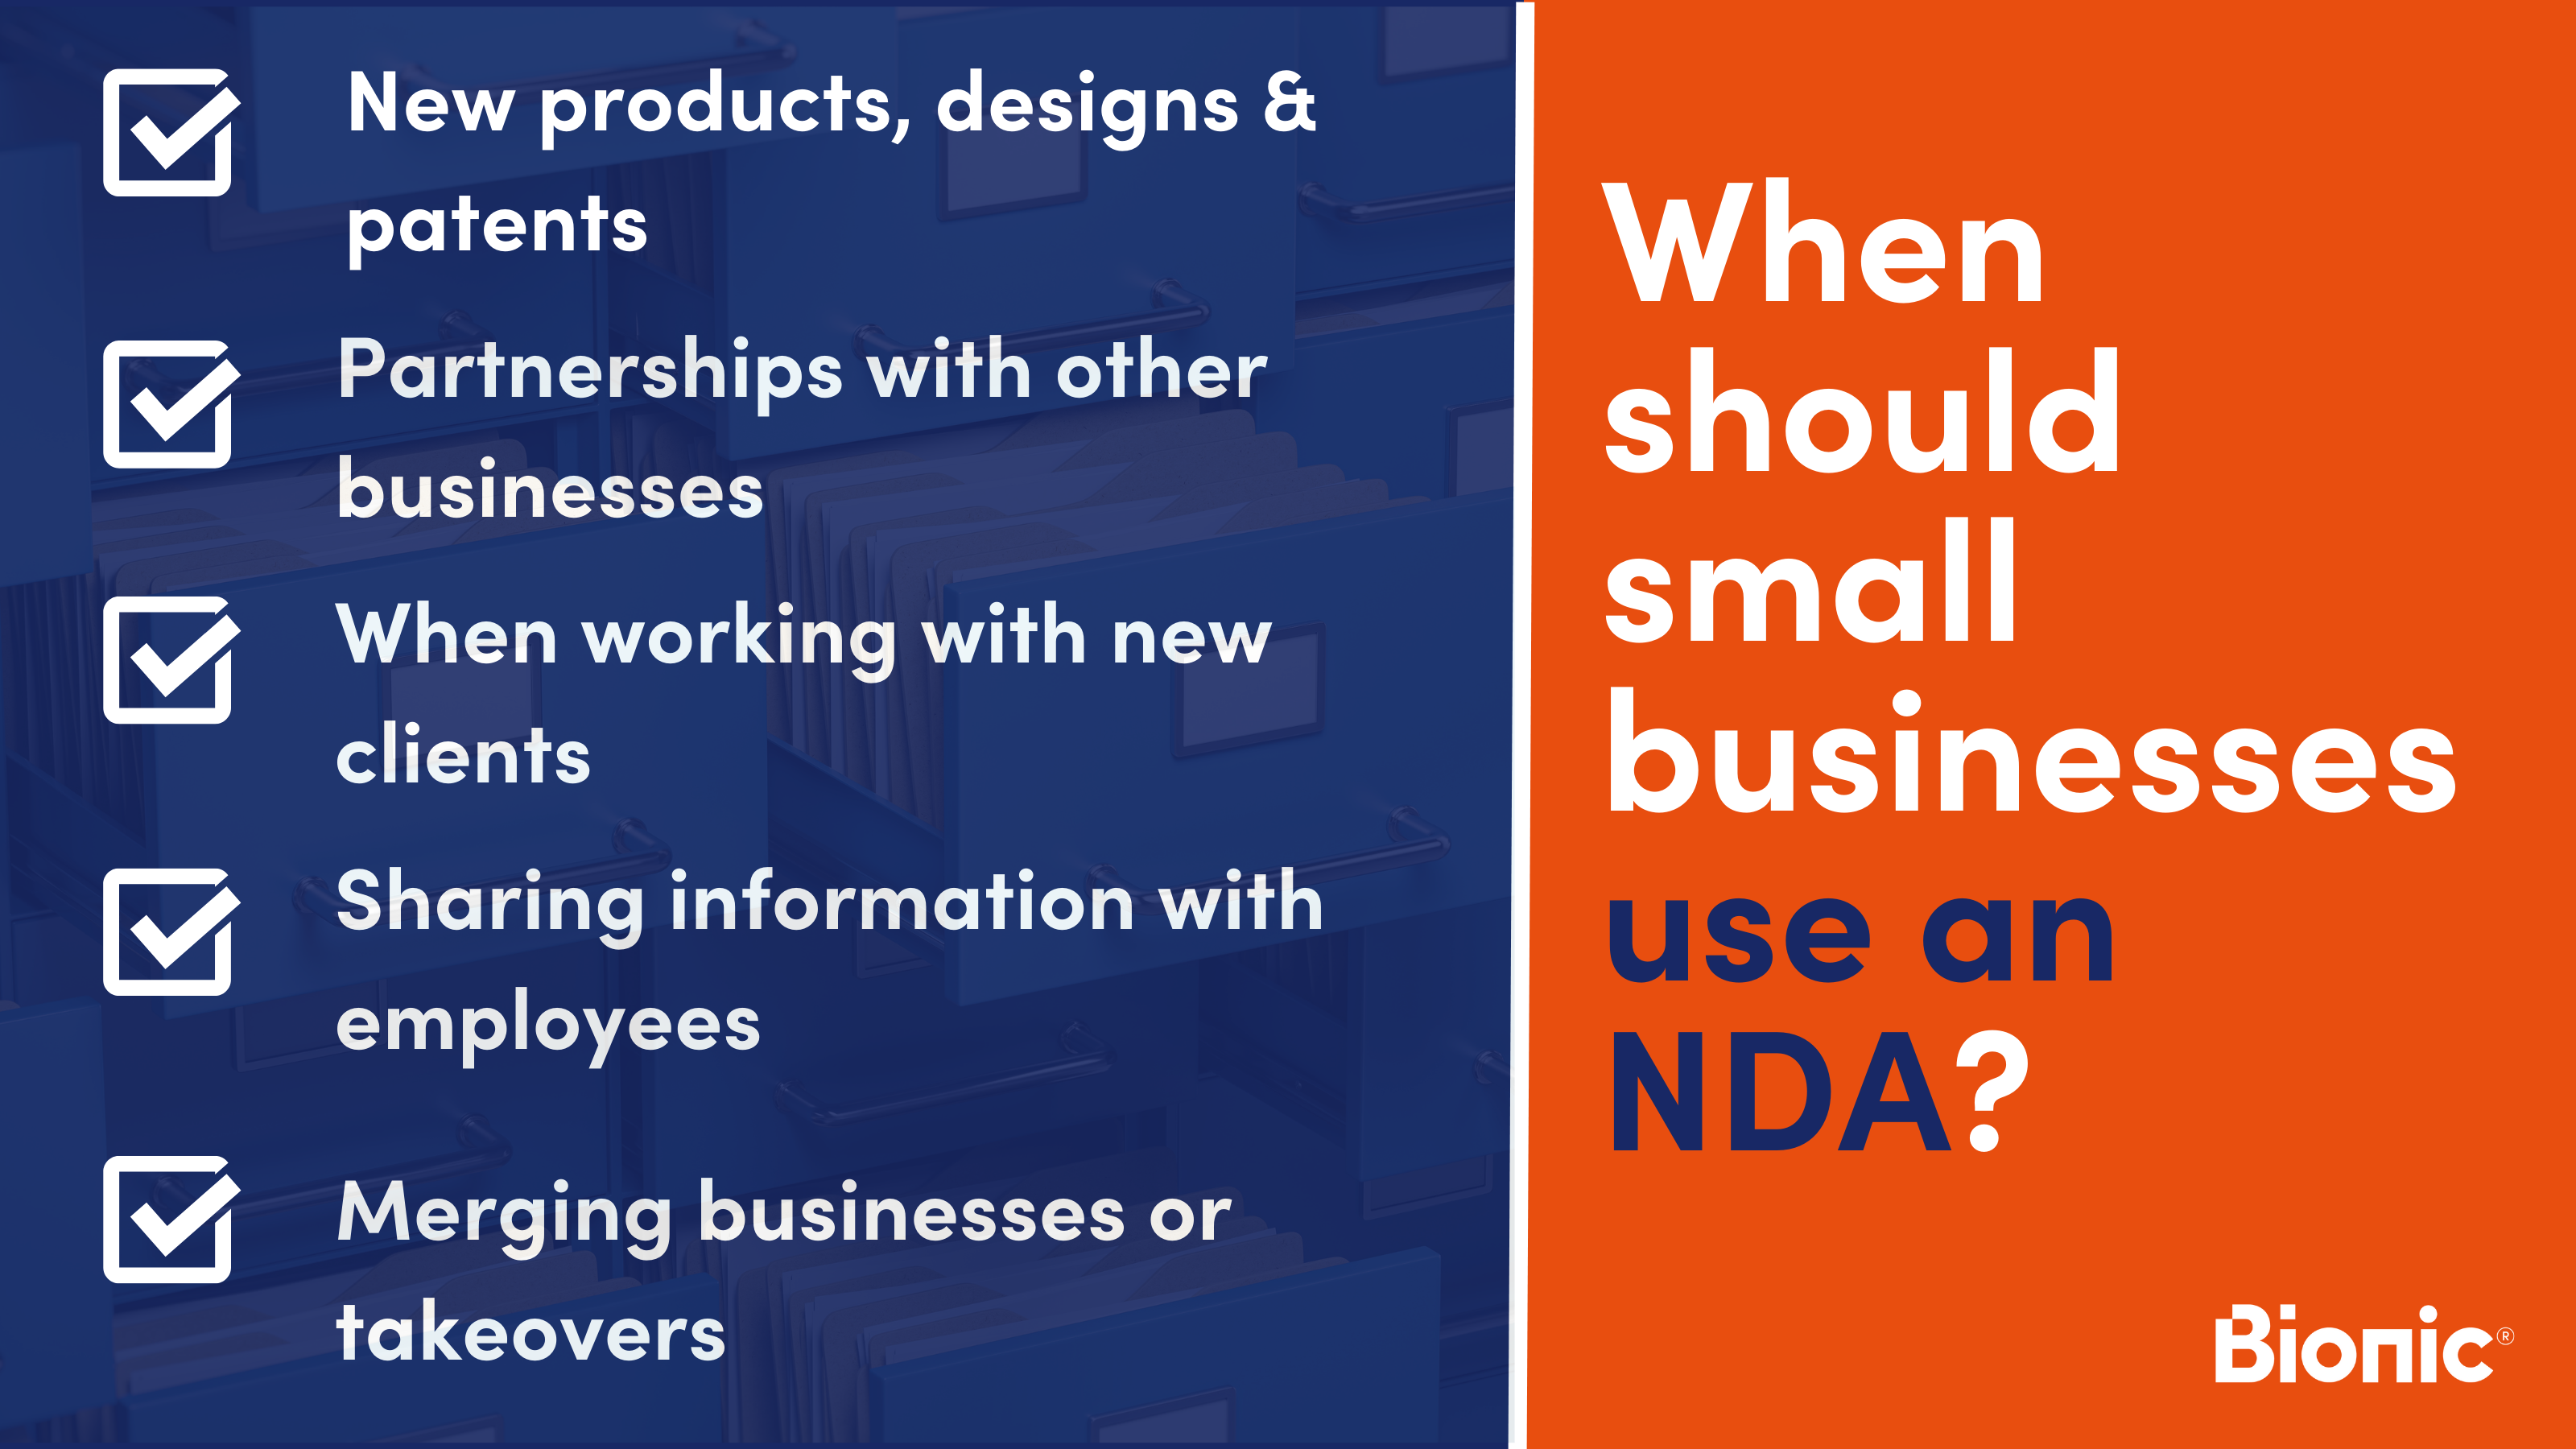 infographic explaining when a small business should use an NDA